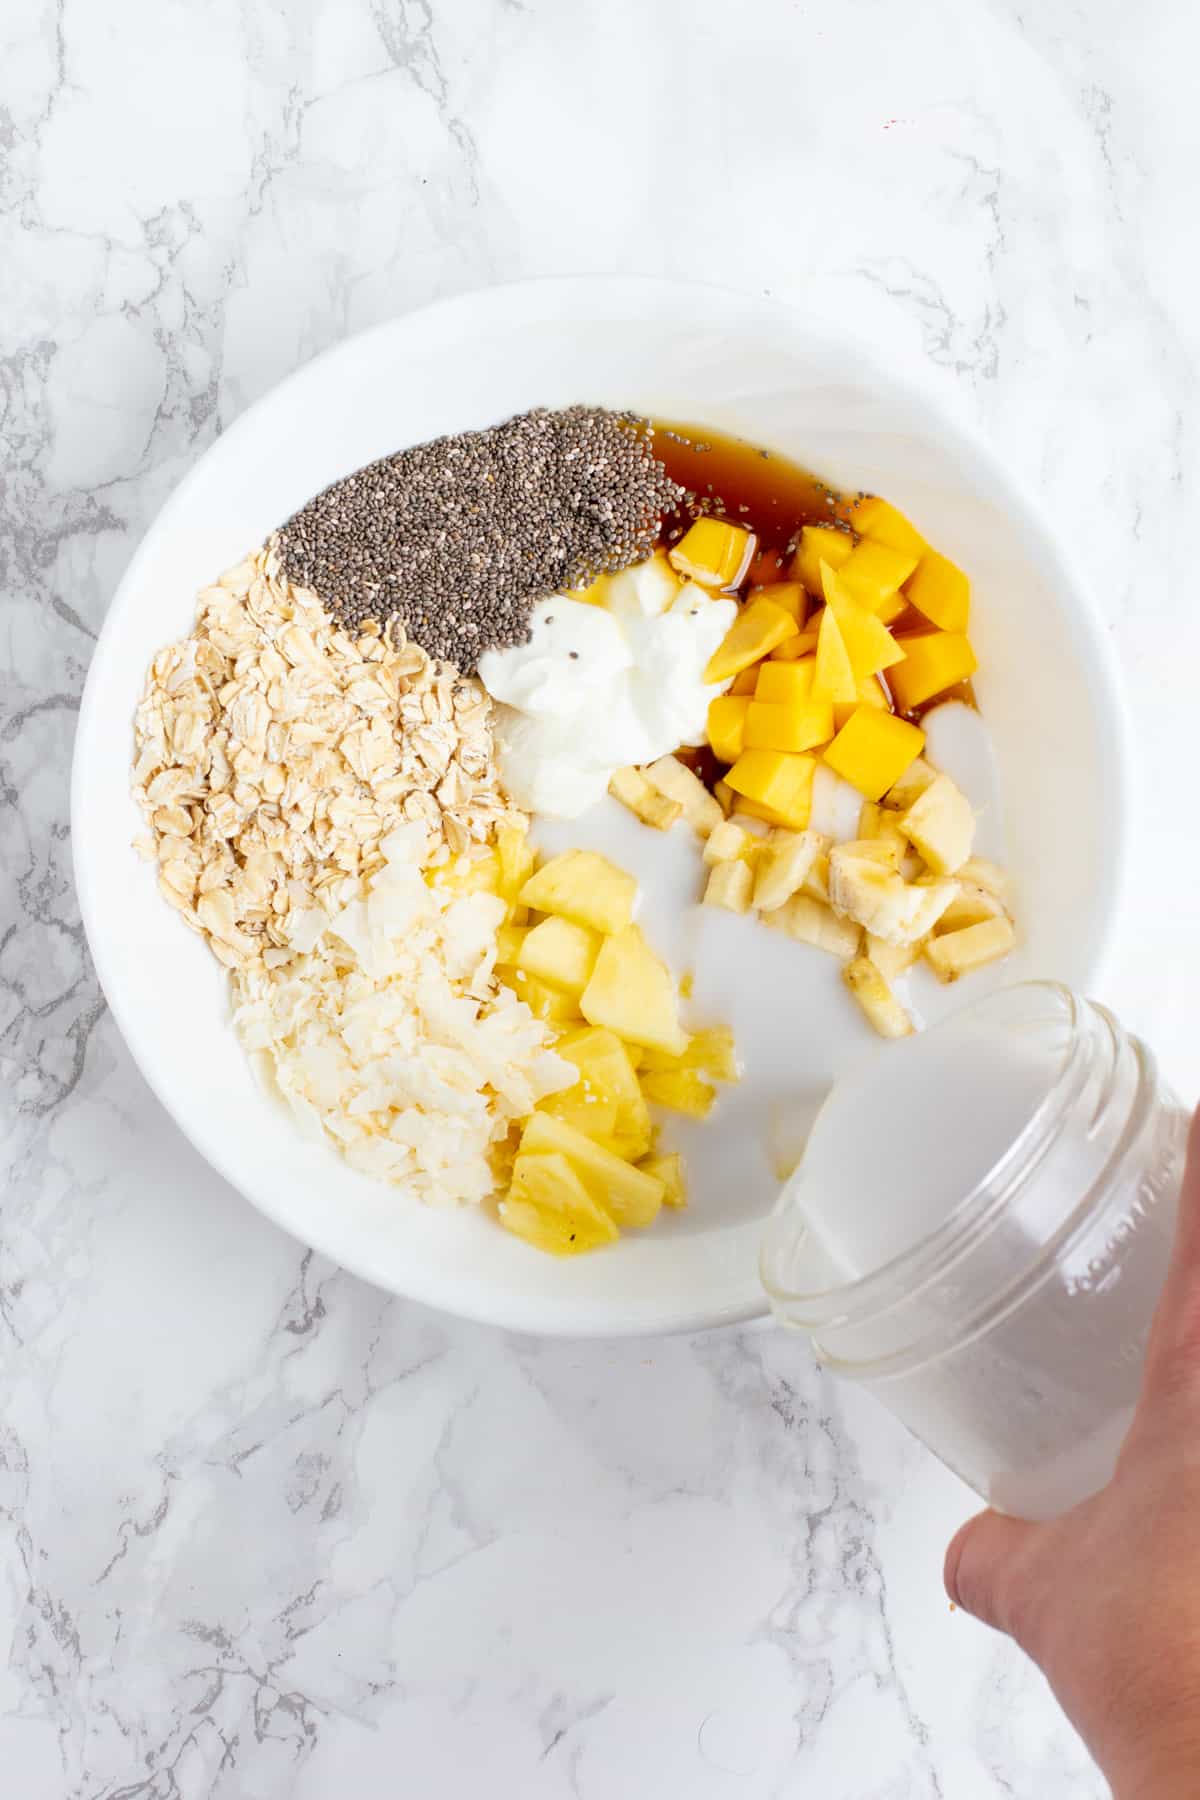 A hand pours milk from a glass jar into a white bowl. The white bowl is filled with other ingredients, including yogurt, chopped pineapple, fresh mango, chia seeds, and rolled oats.